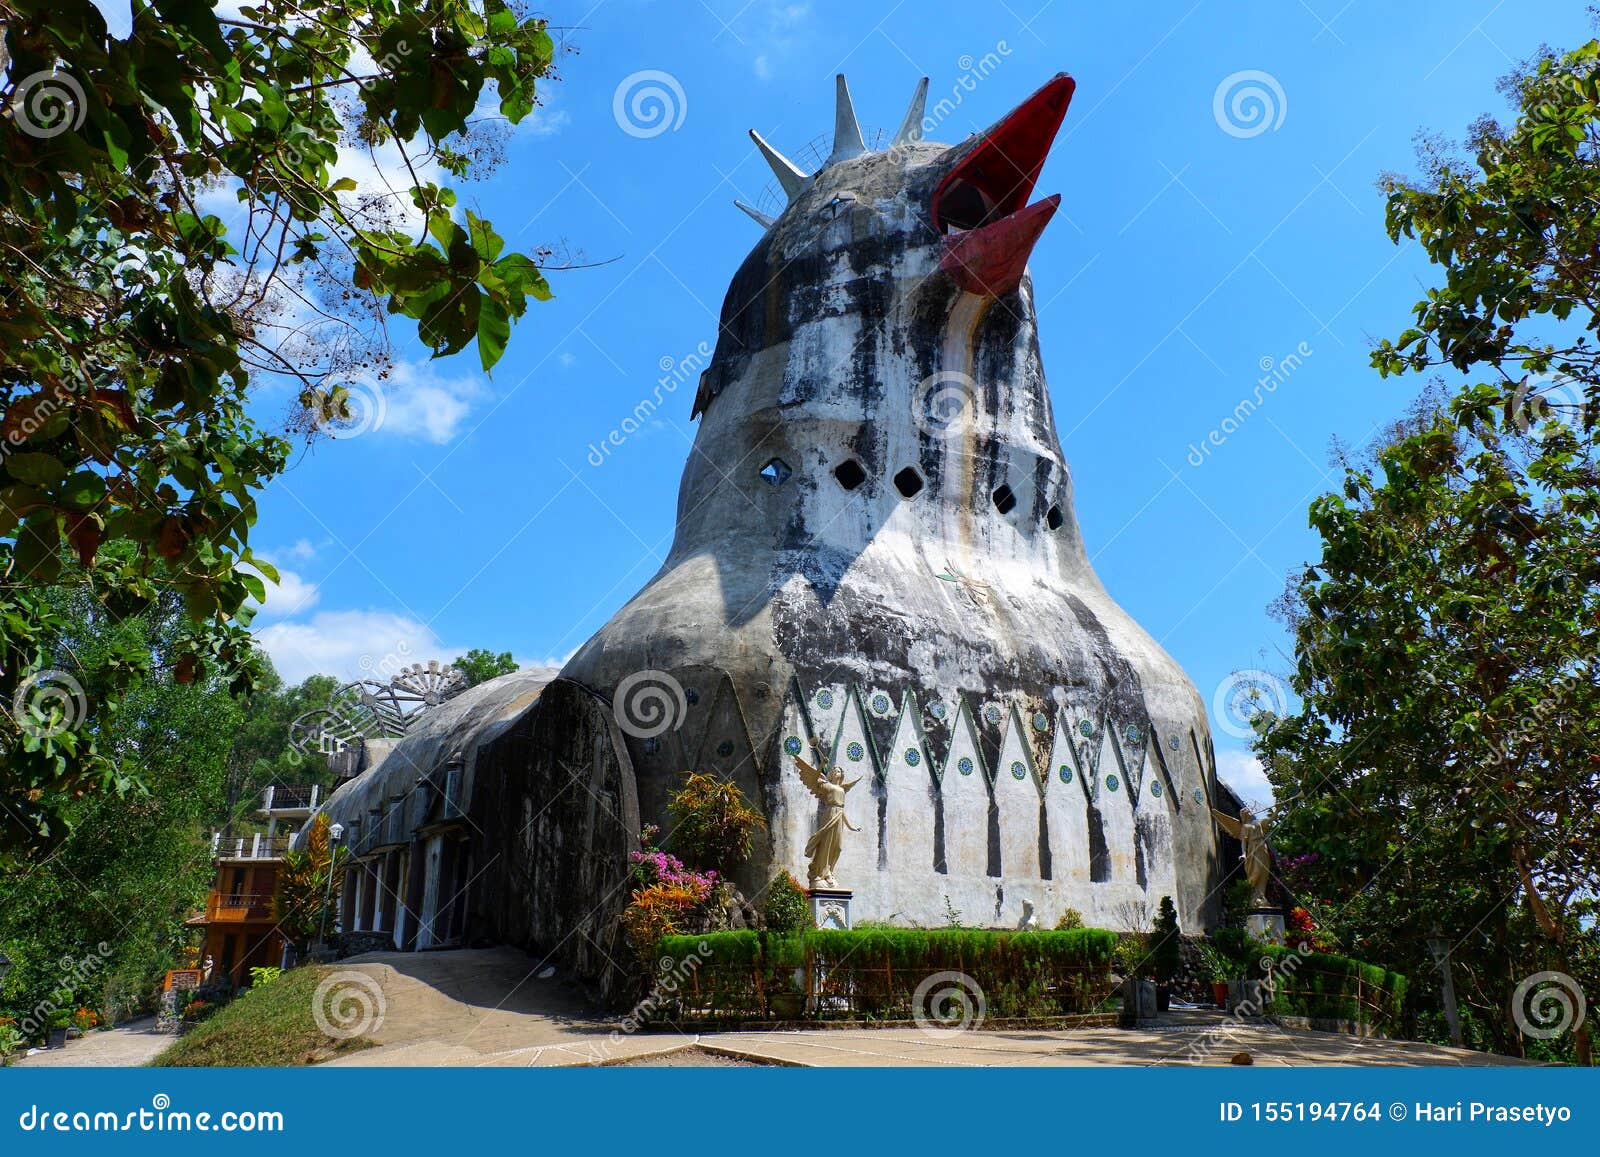 Gereja Ayam, The Abandoned Chicken Church Which Looks Like ...